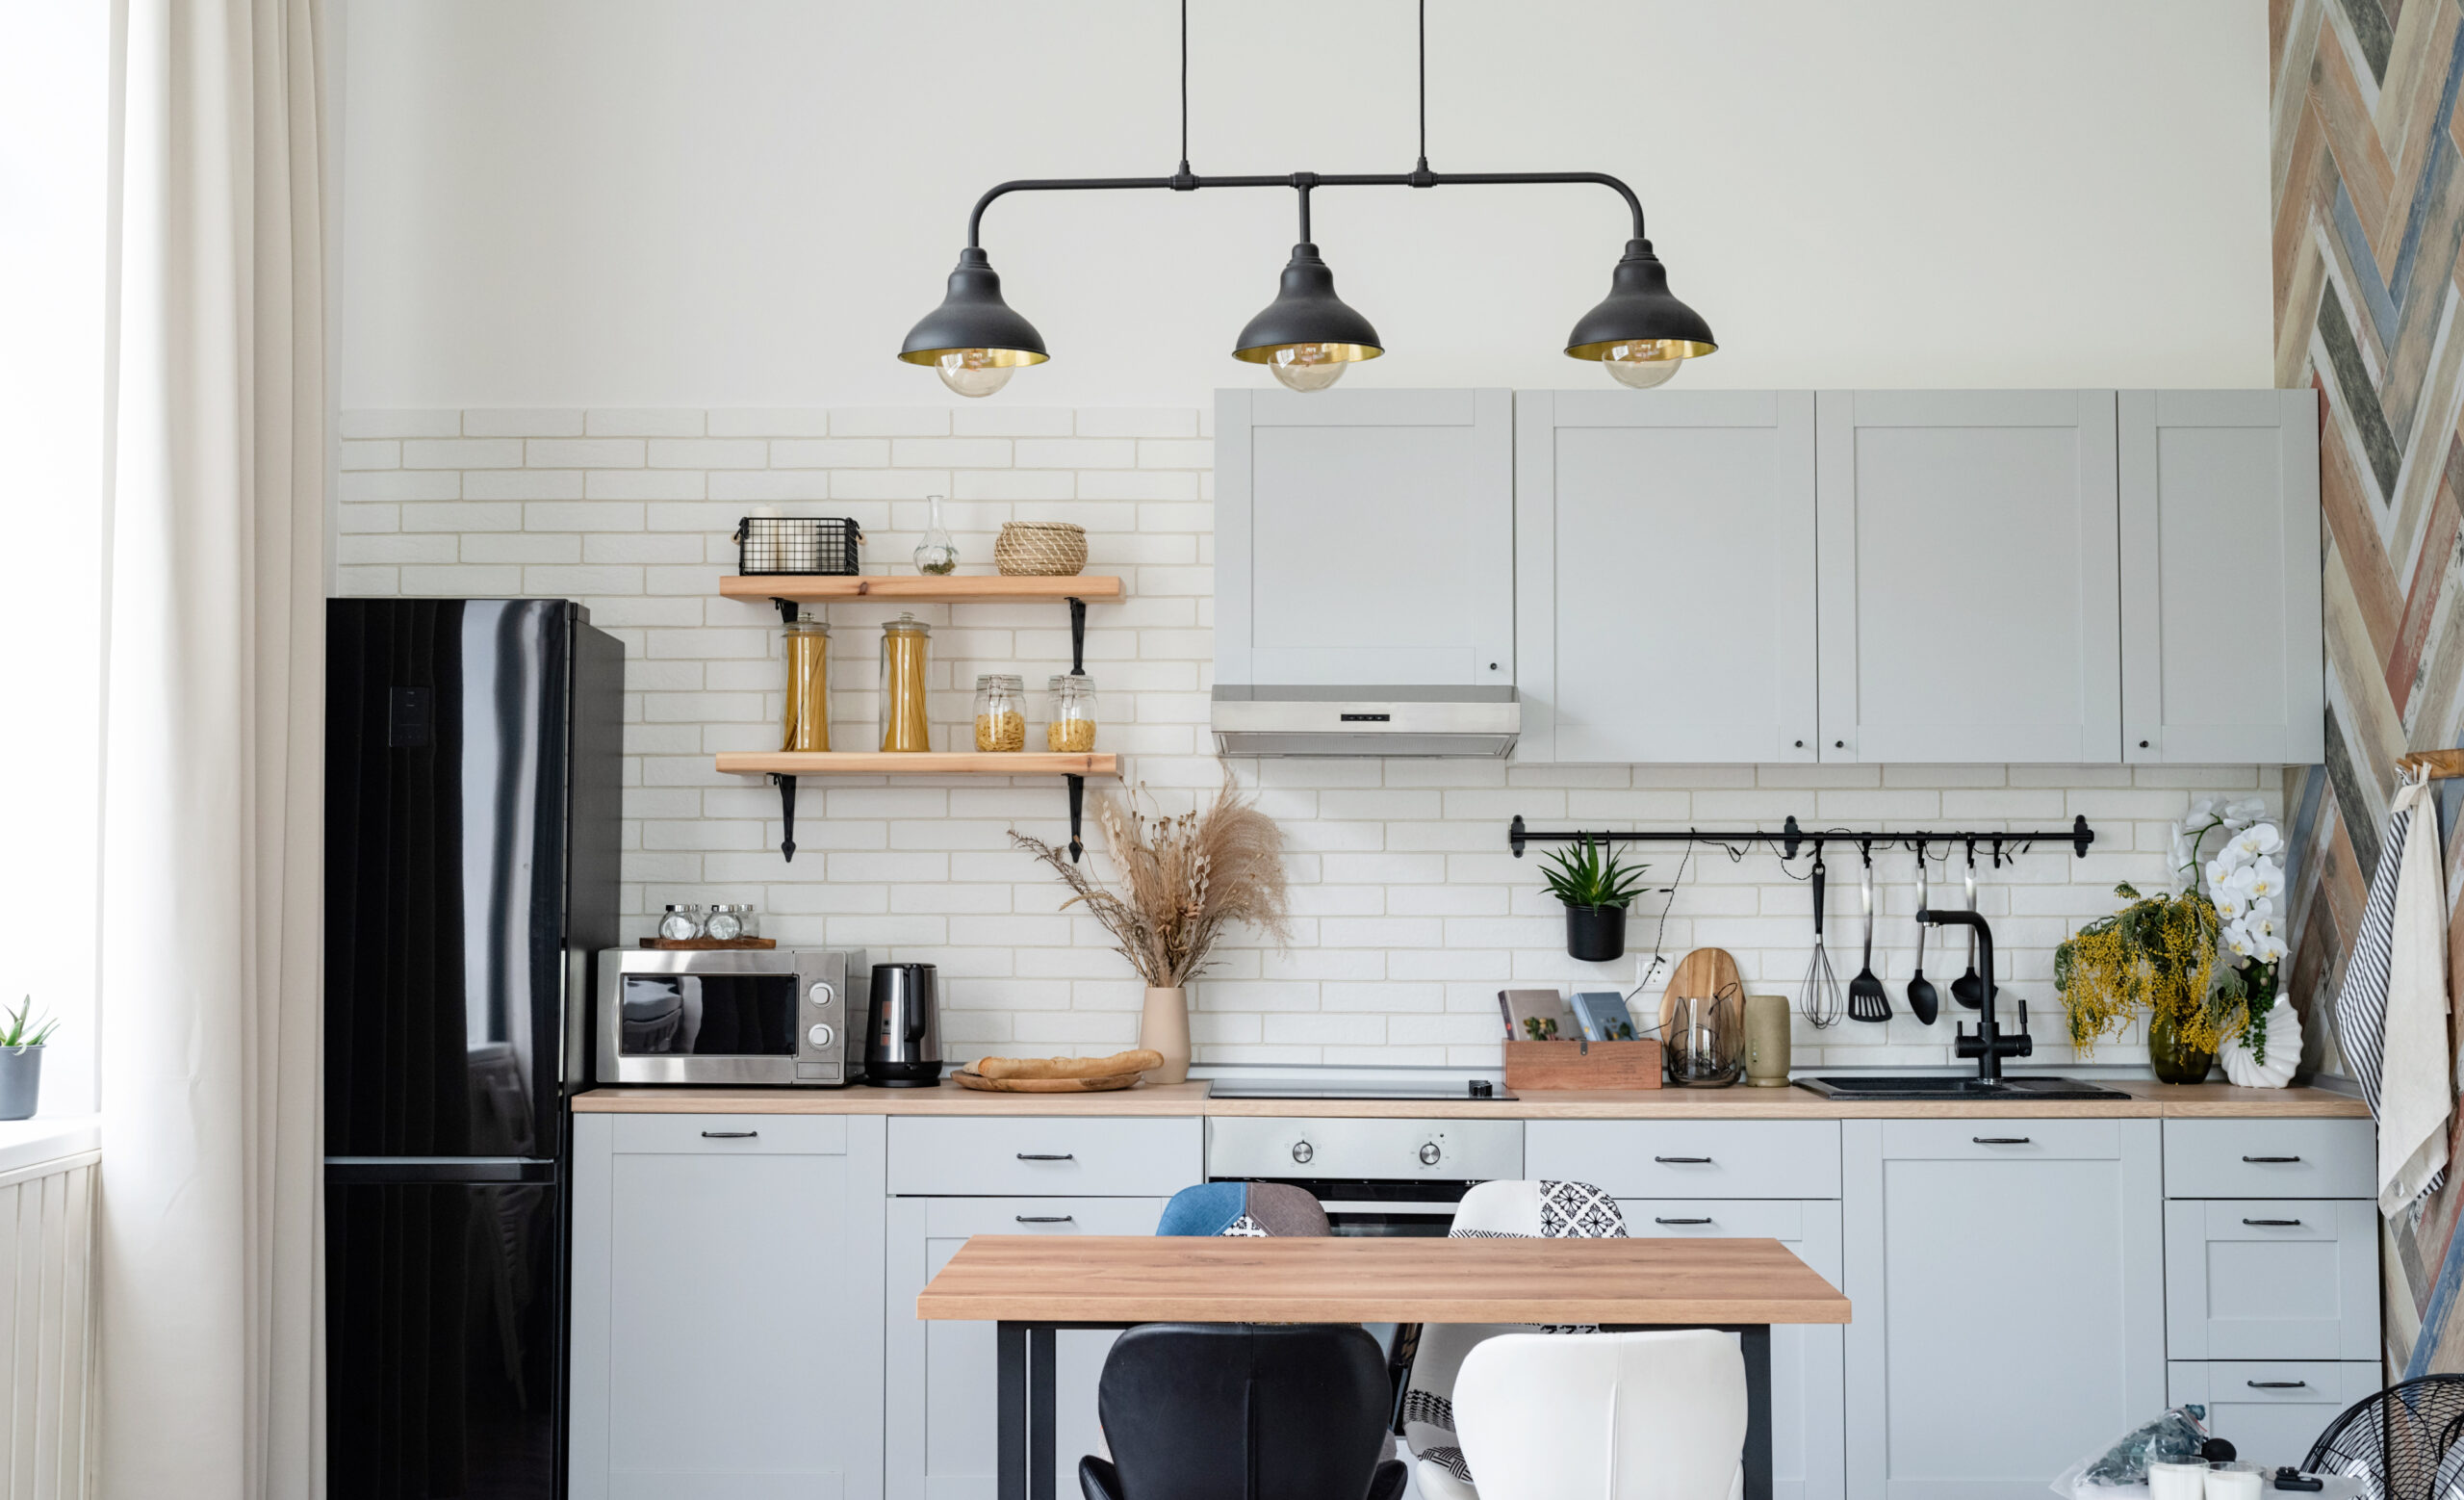 A Budget-Friendly List of Kitchen Essentials for First Apartment: 56 Cheap Must-Haves!